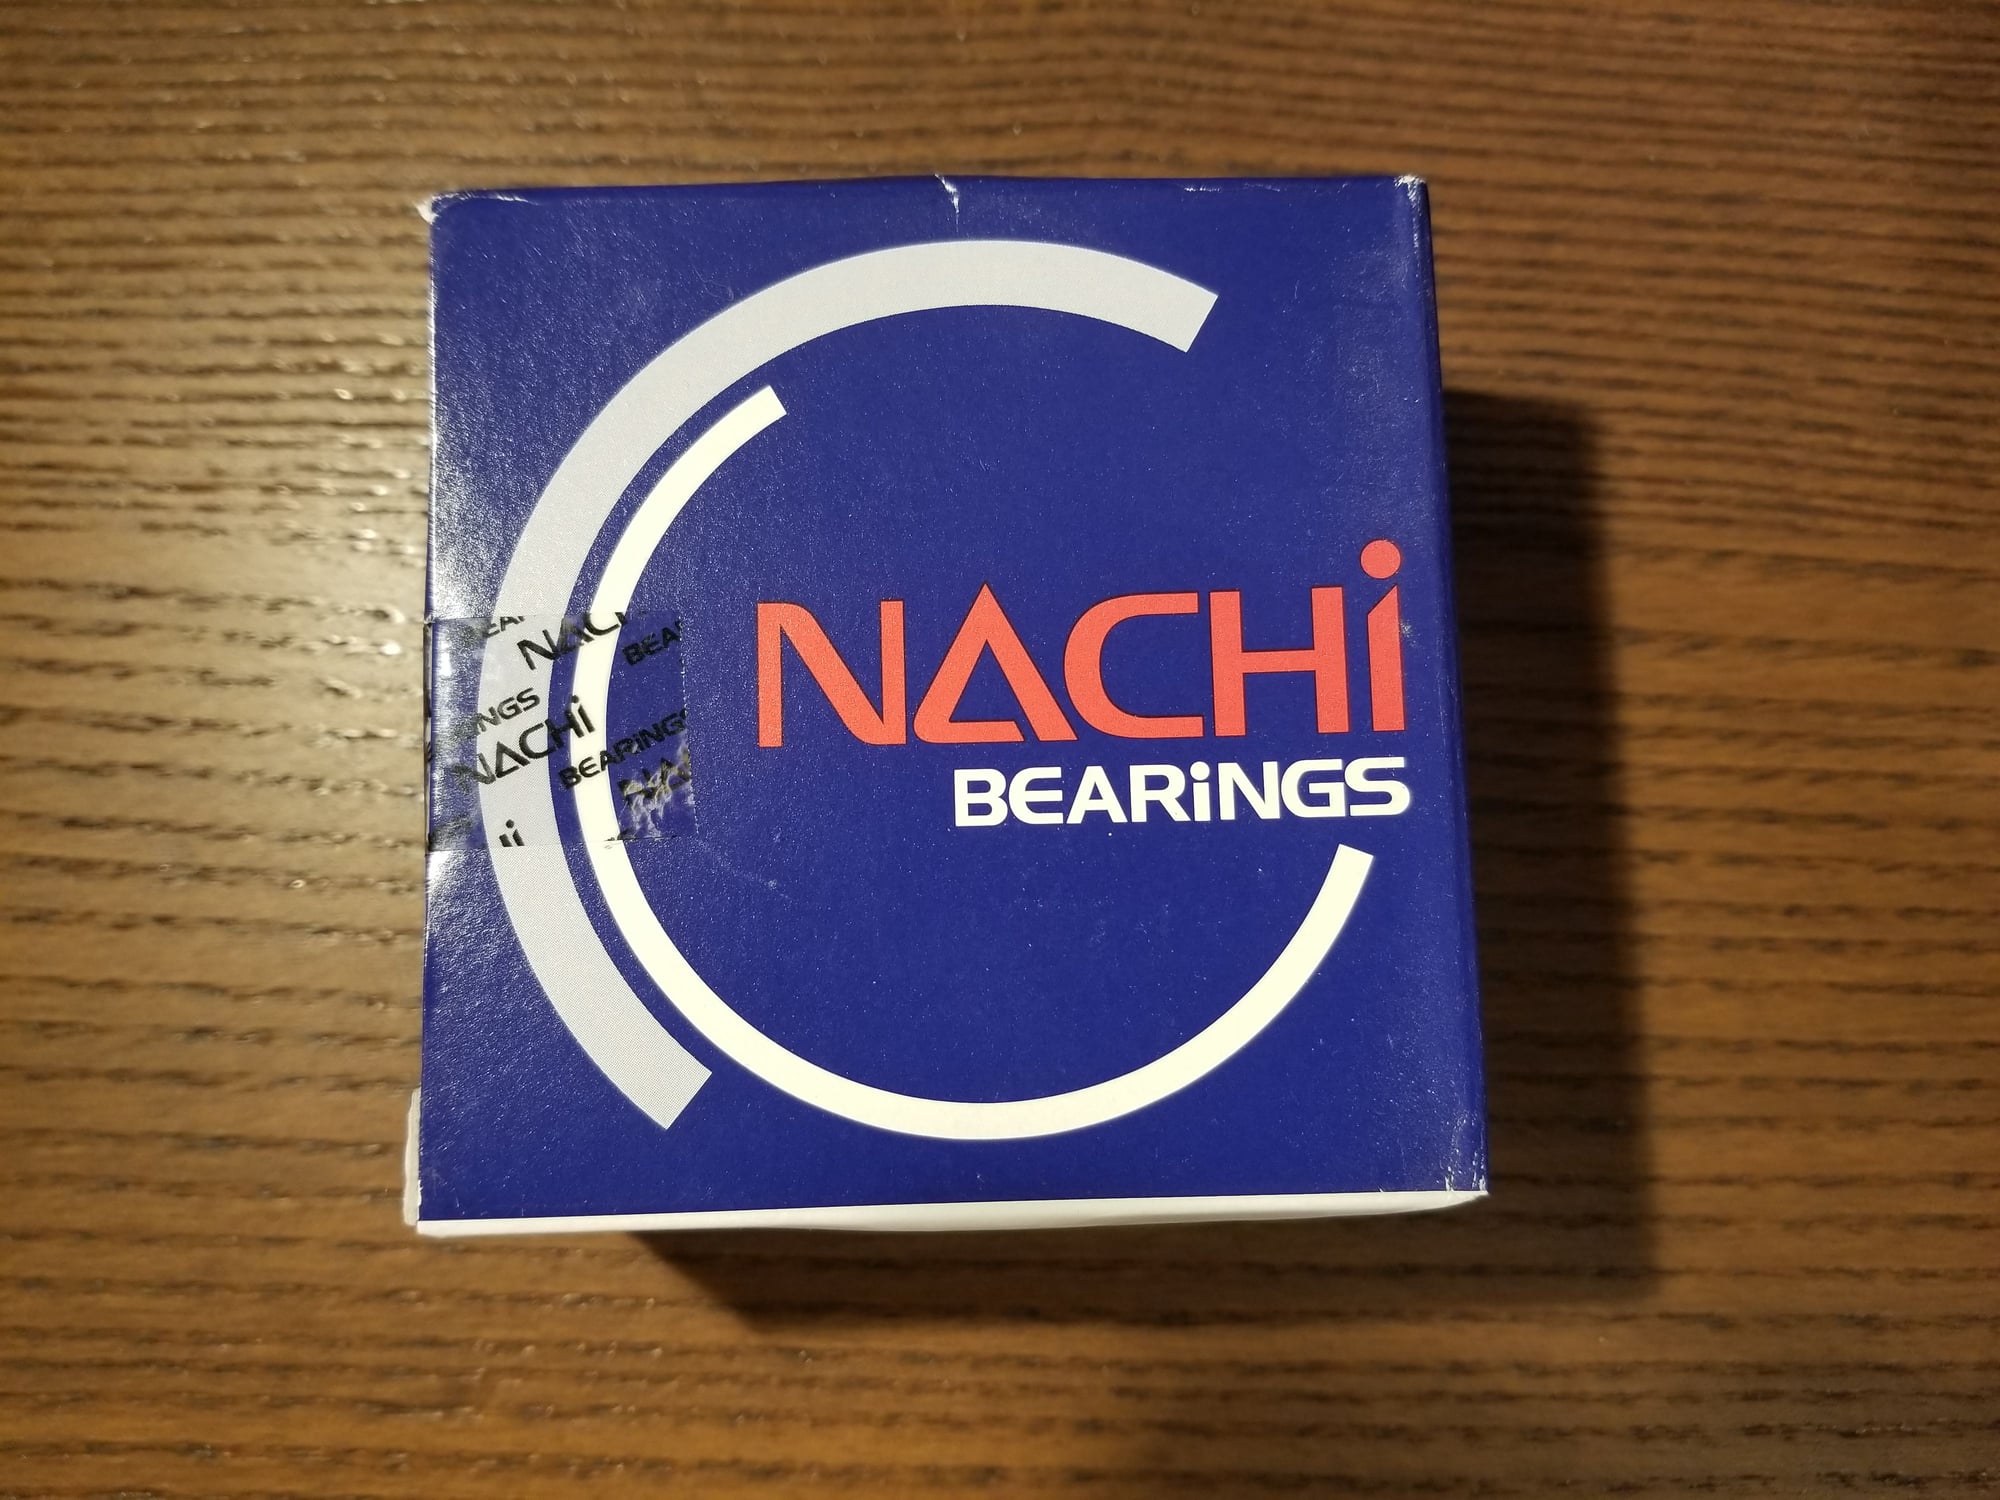 Miscellaneous - 45BG07S5A1G-2DL NACHI Supercharger Bearing for M113K with 2 Pulley Shims - New - 0  All Models - New York, NY 10011, United States